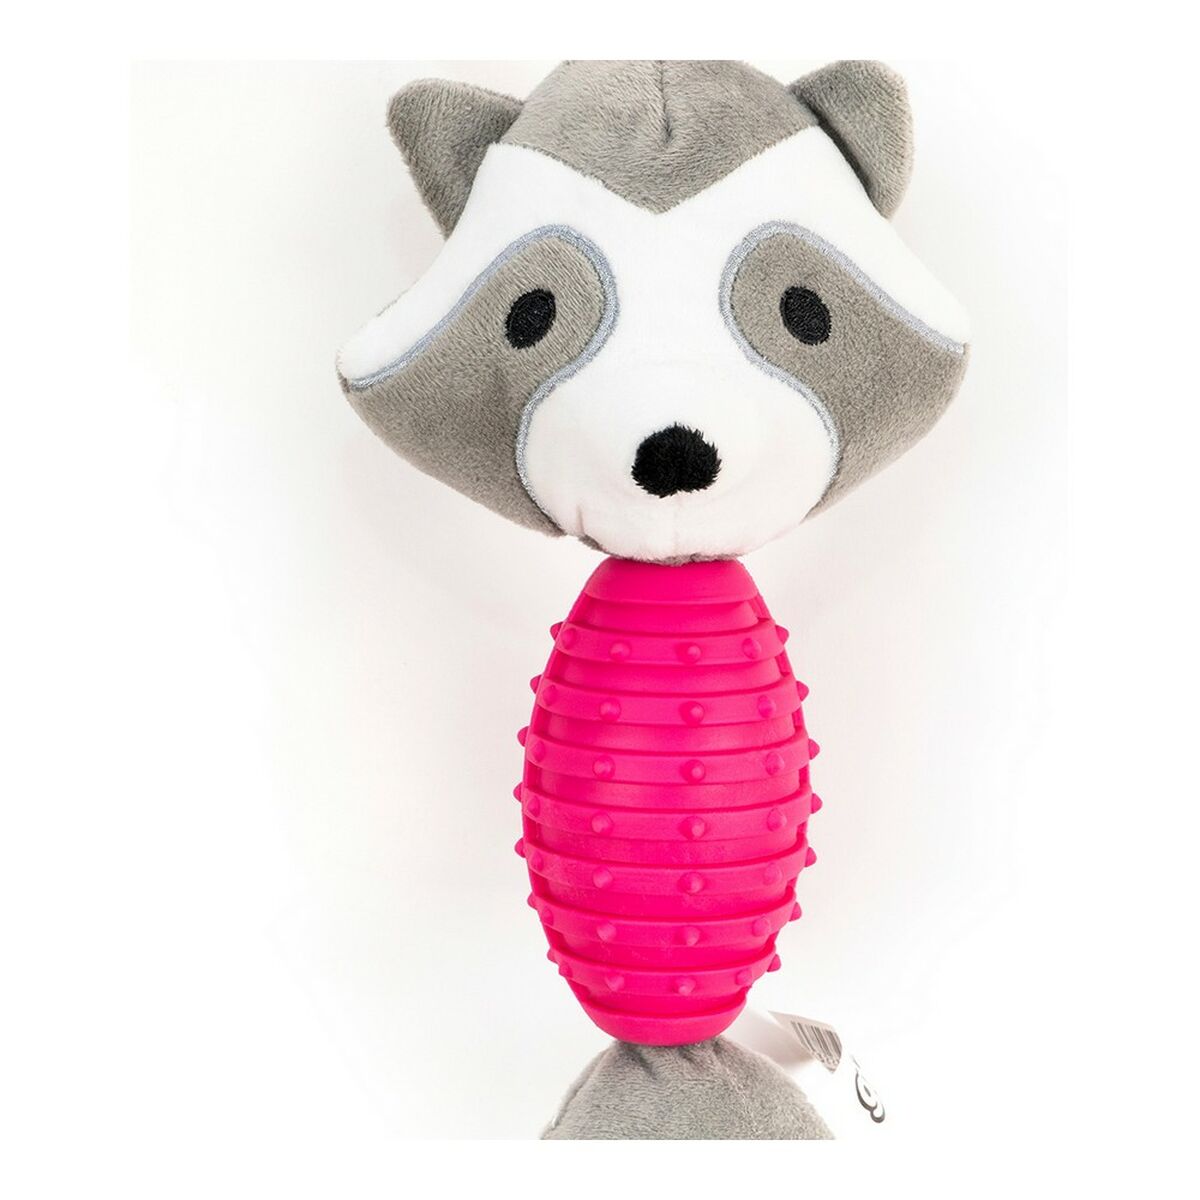 Dog chewing toy Gloria Zar with sound Polyester Eva Rubber polypropylene Racoon